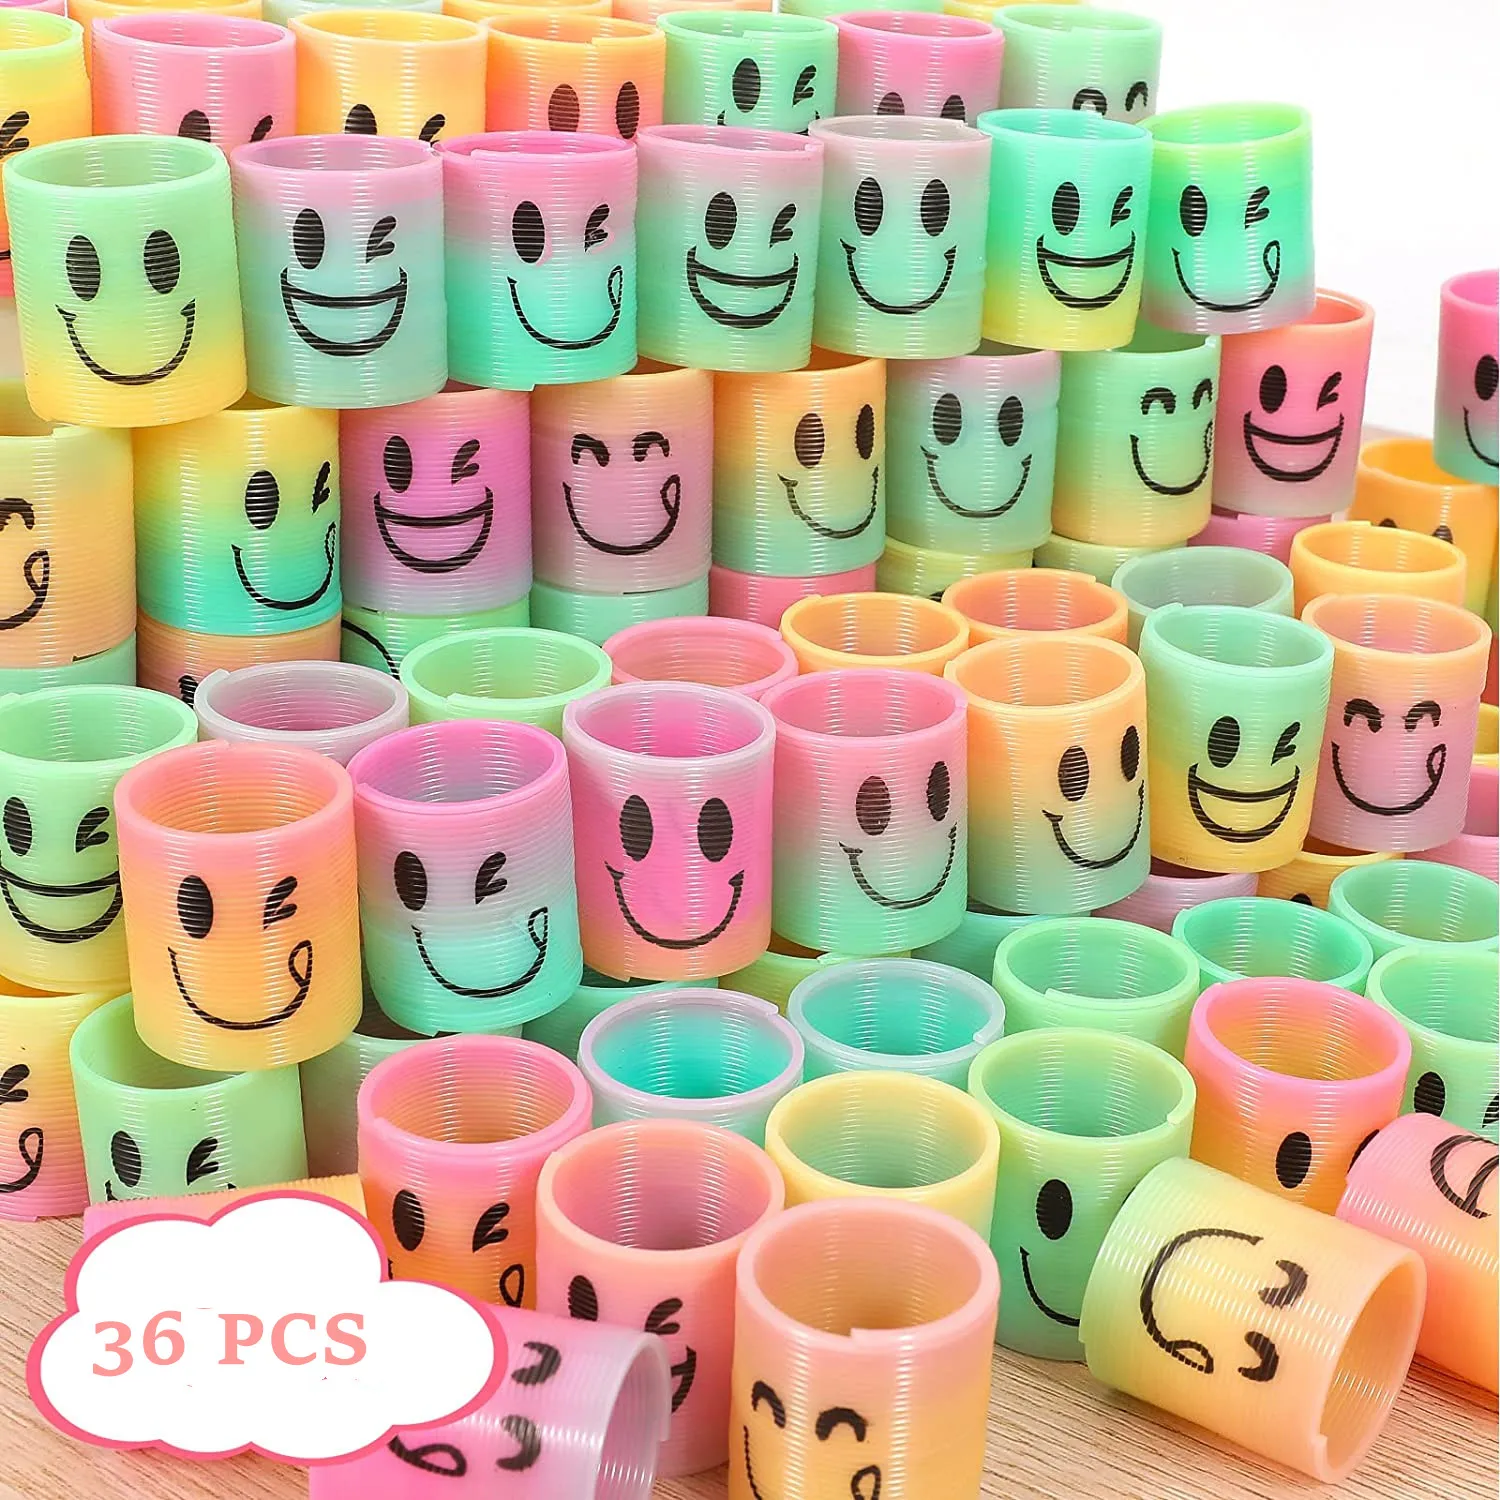 36 Pcs Mini Party Favors for Kids Goodie Bags Stuffers for Birthday Party,Classroom Prize Kids Fidget Toys,Small Bulk Toys Gifts enlarge